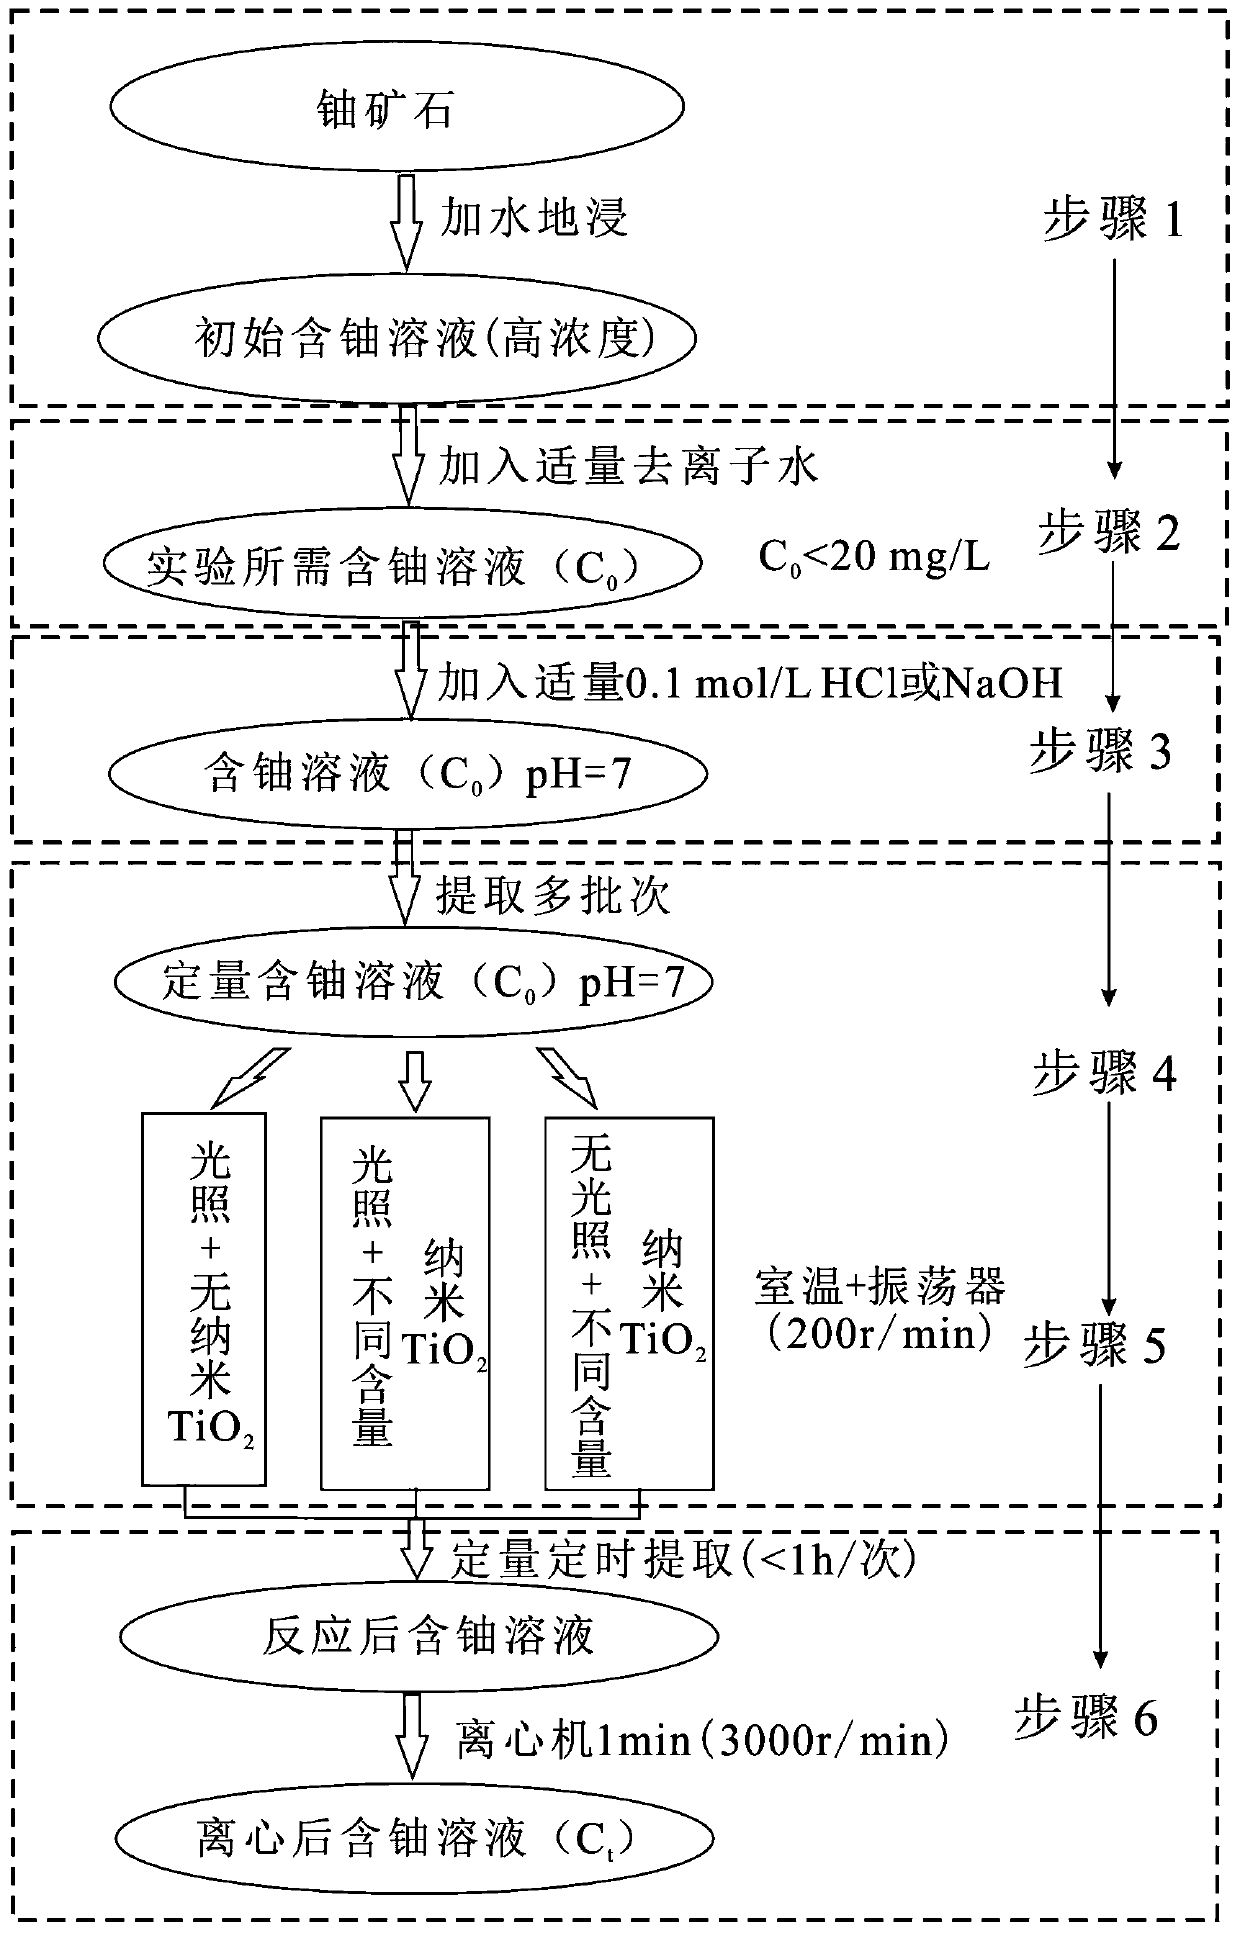 Method for treating uranium-containing wastewater by TiO2 adsorption-photocatalytic reduction